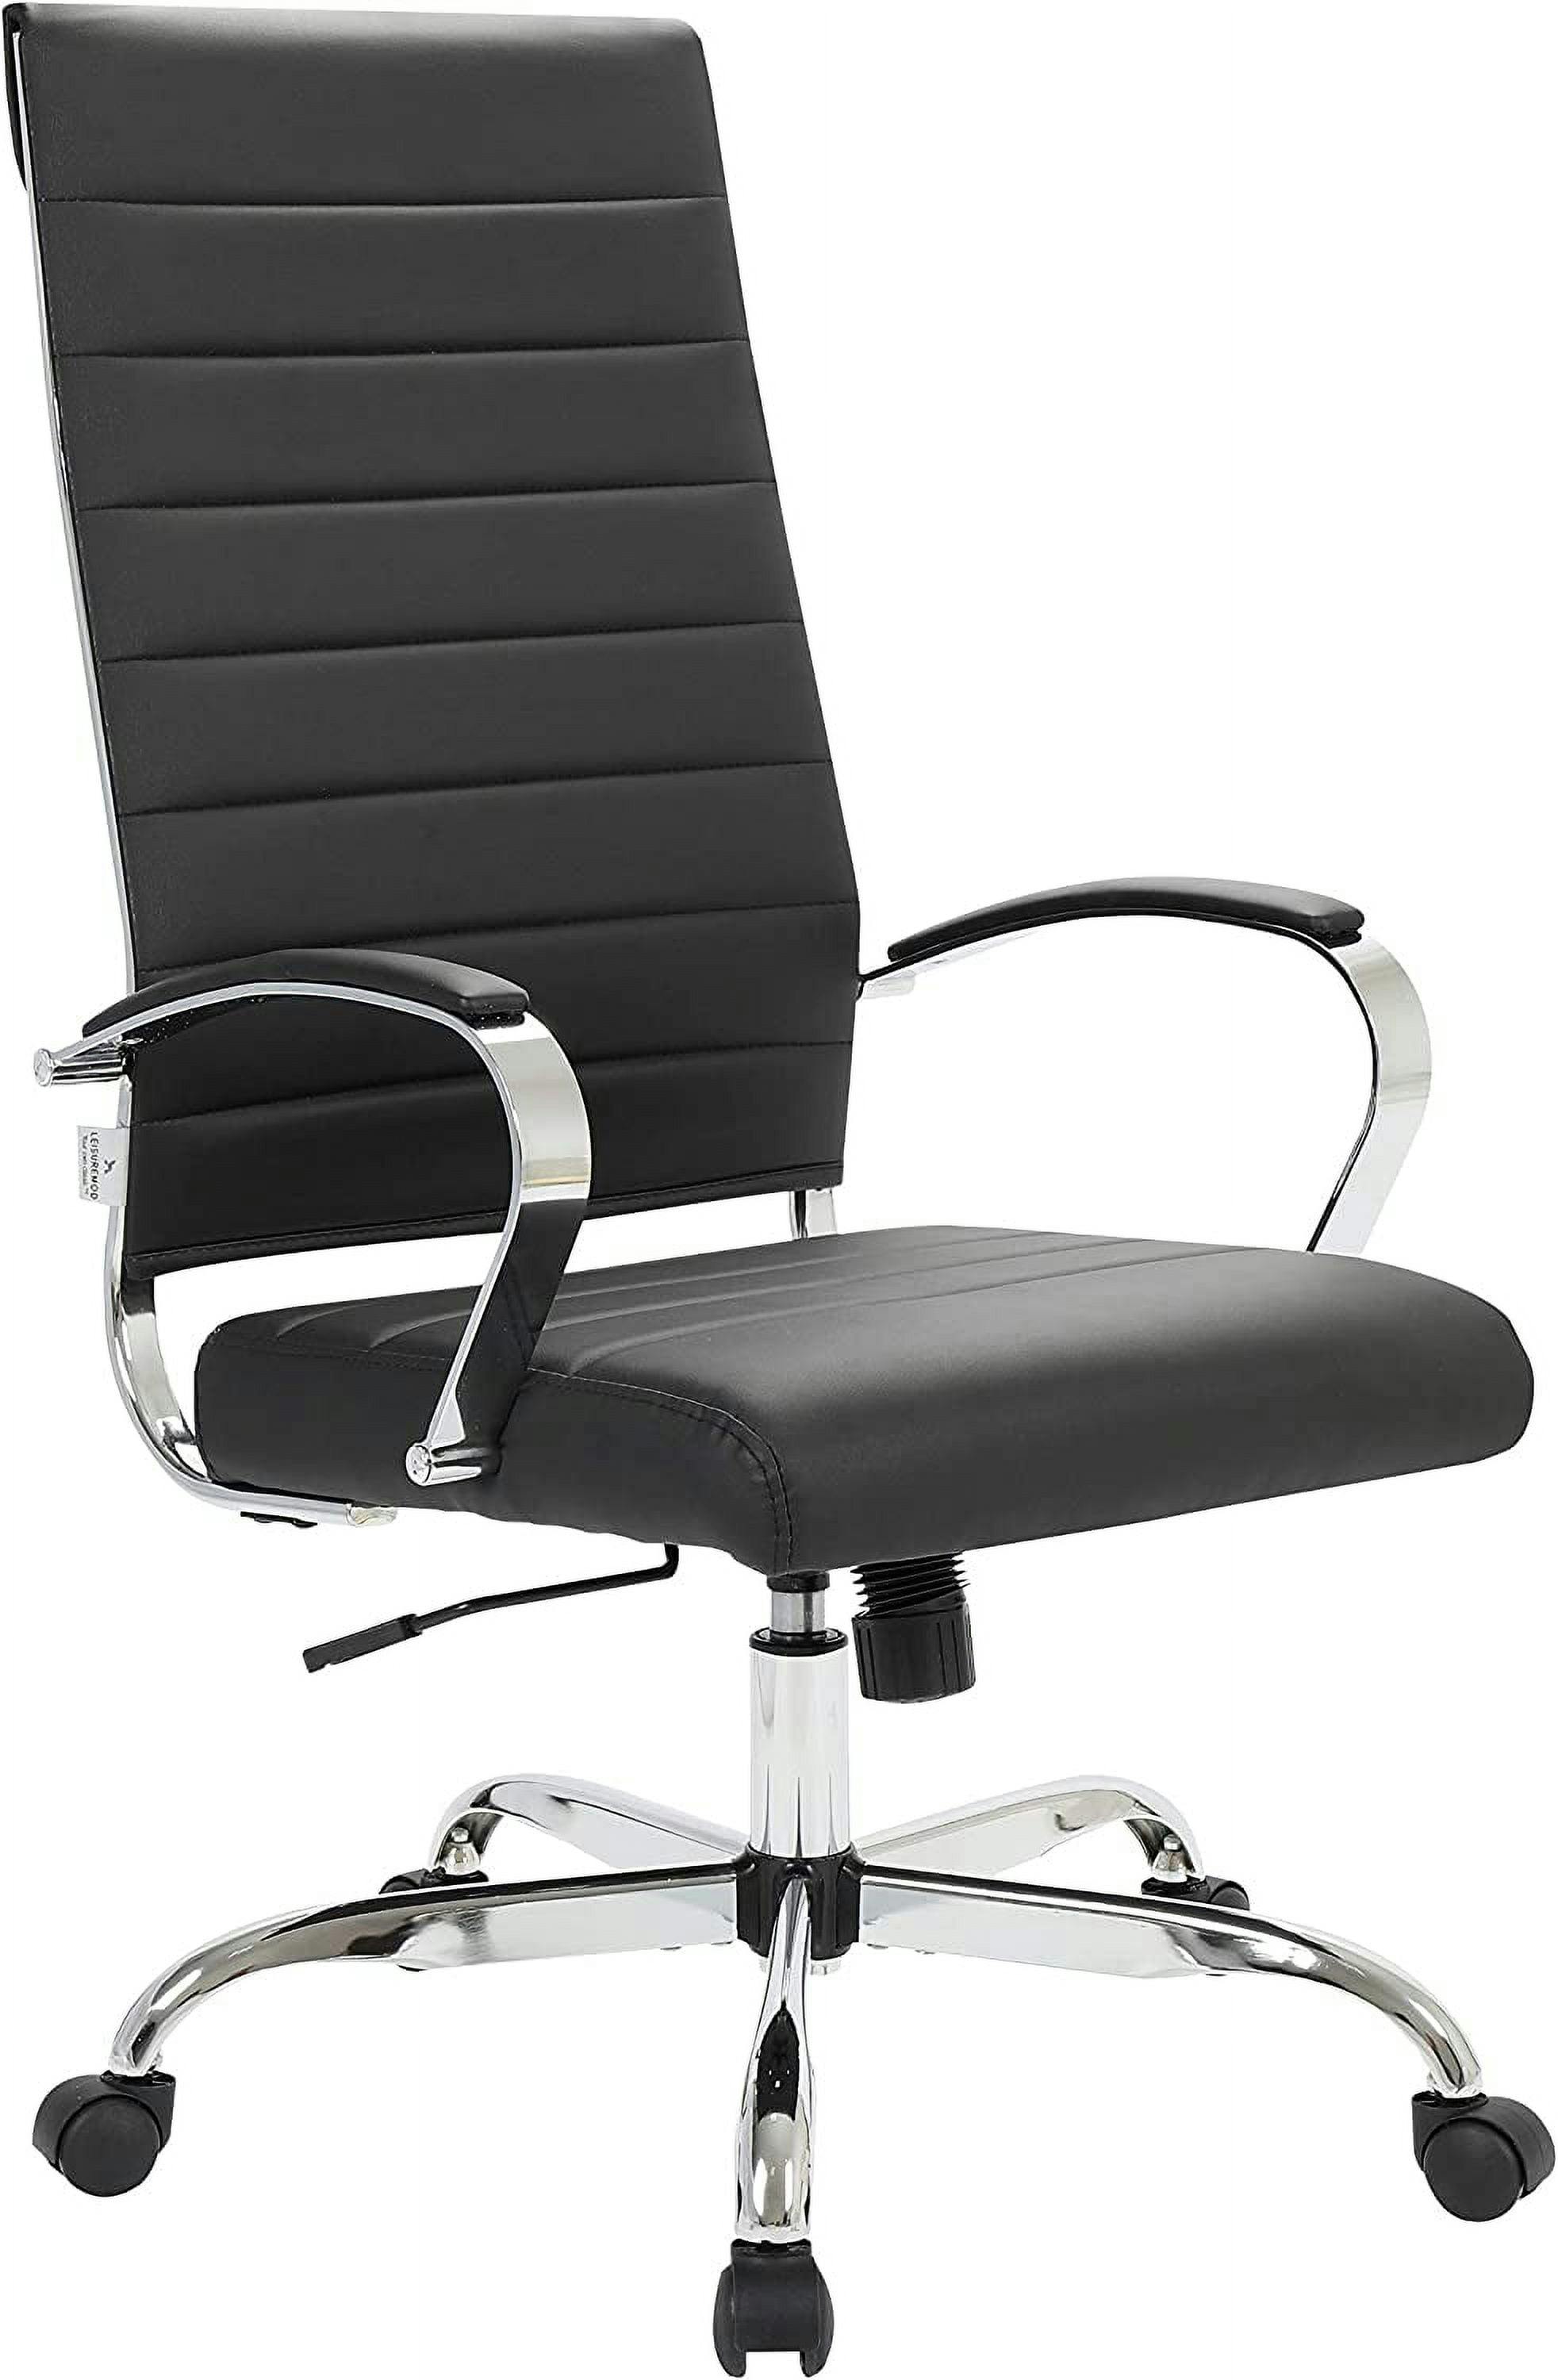 Benmar High-Back Swivel Leather Office Chair with Metal Accents, Black